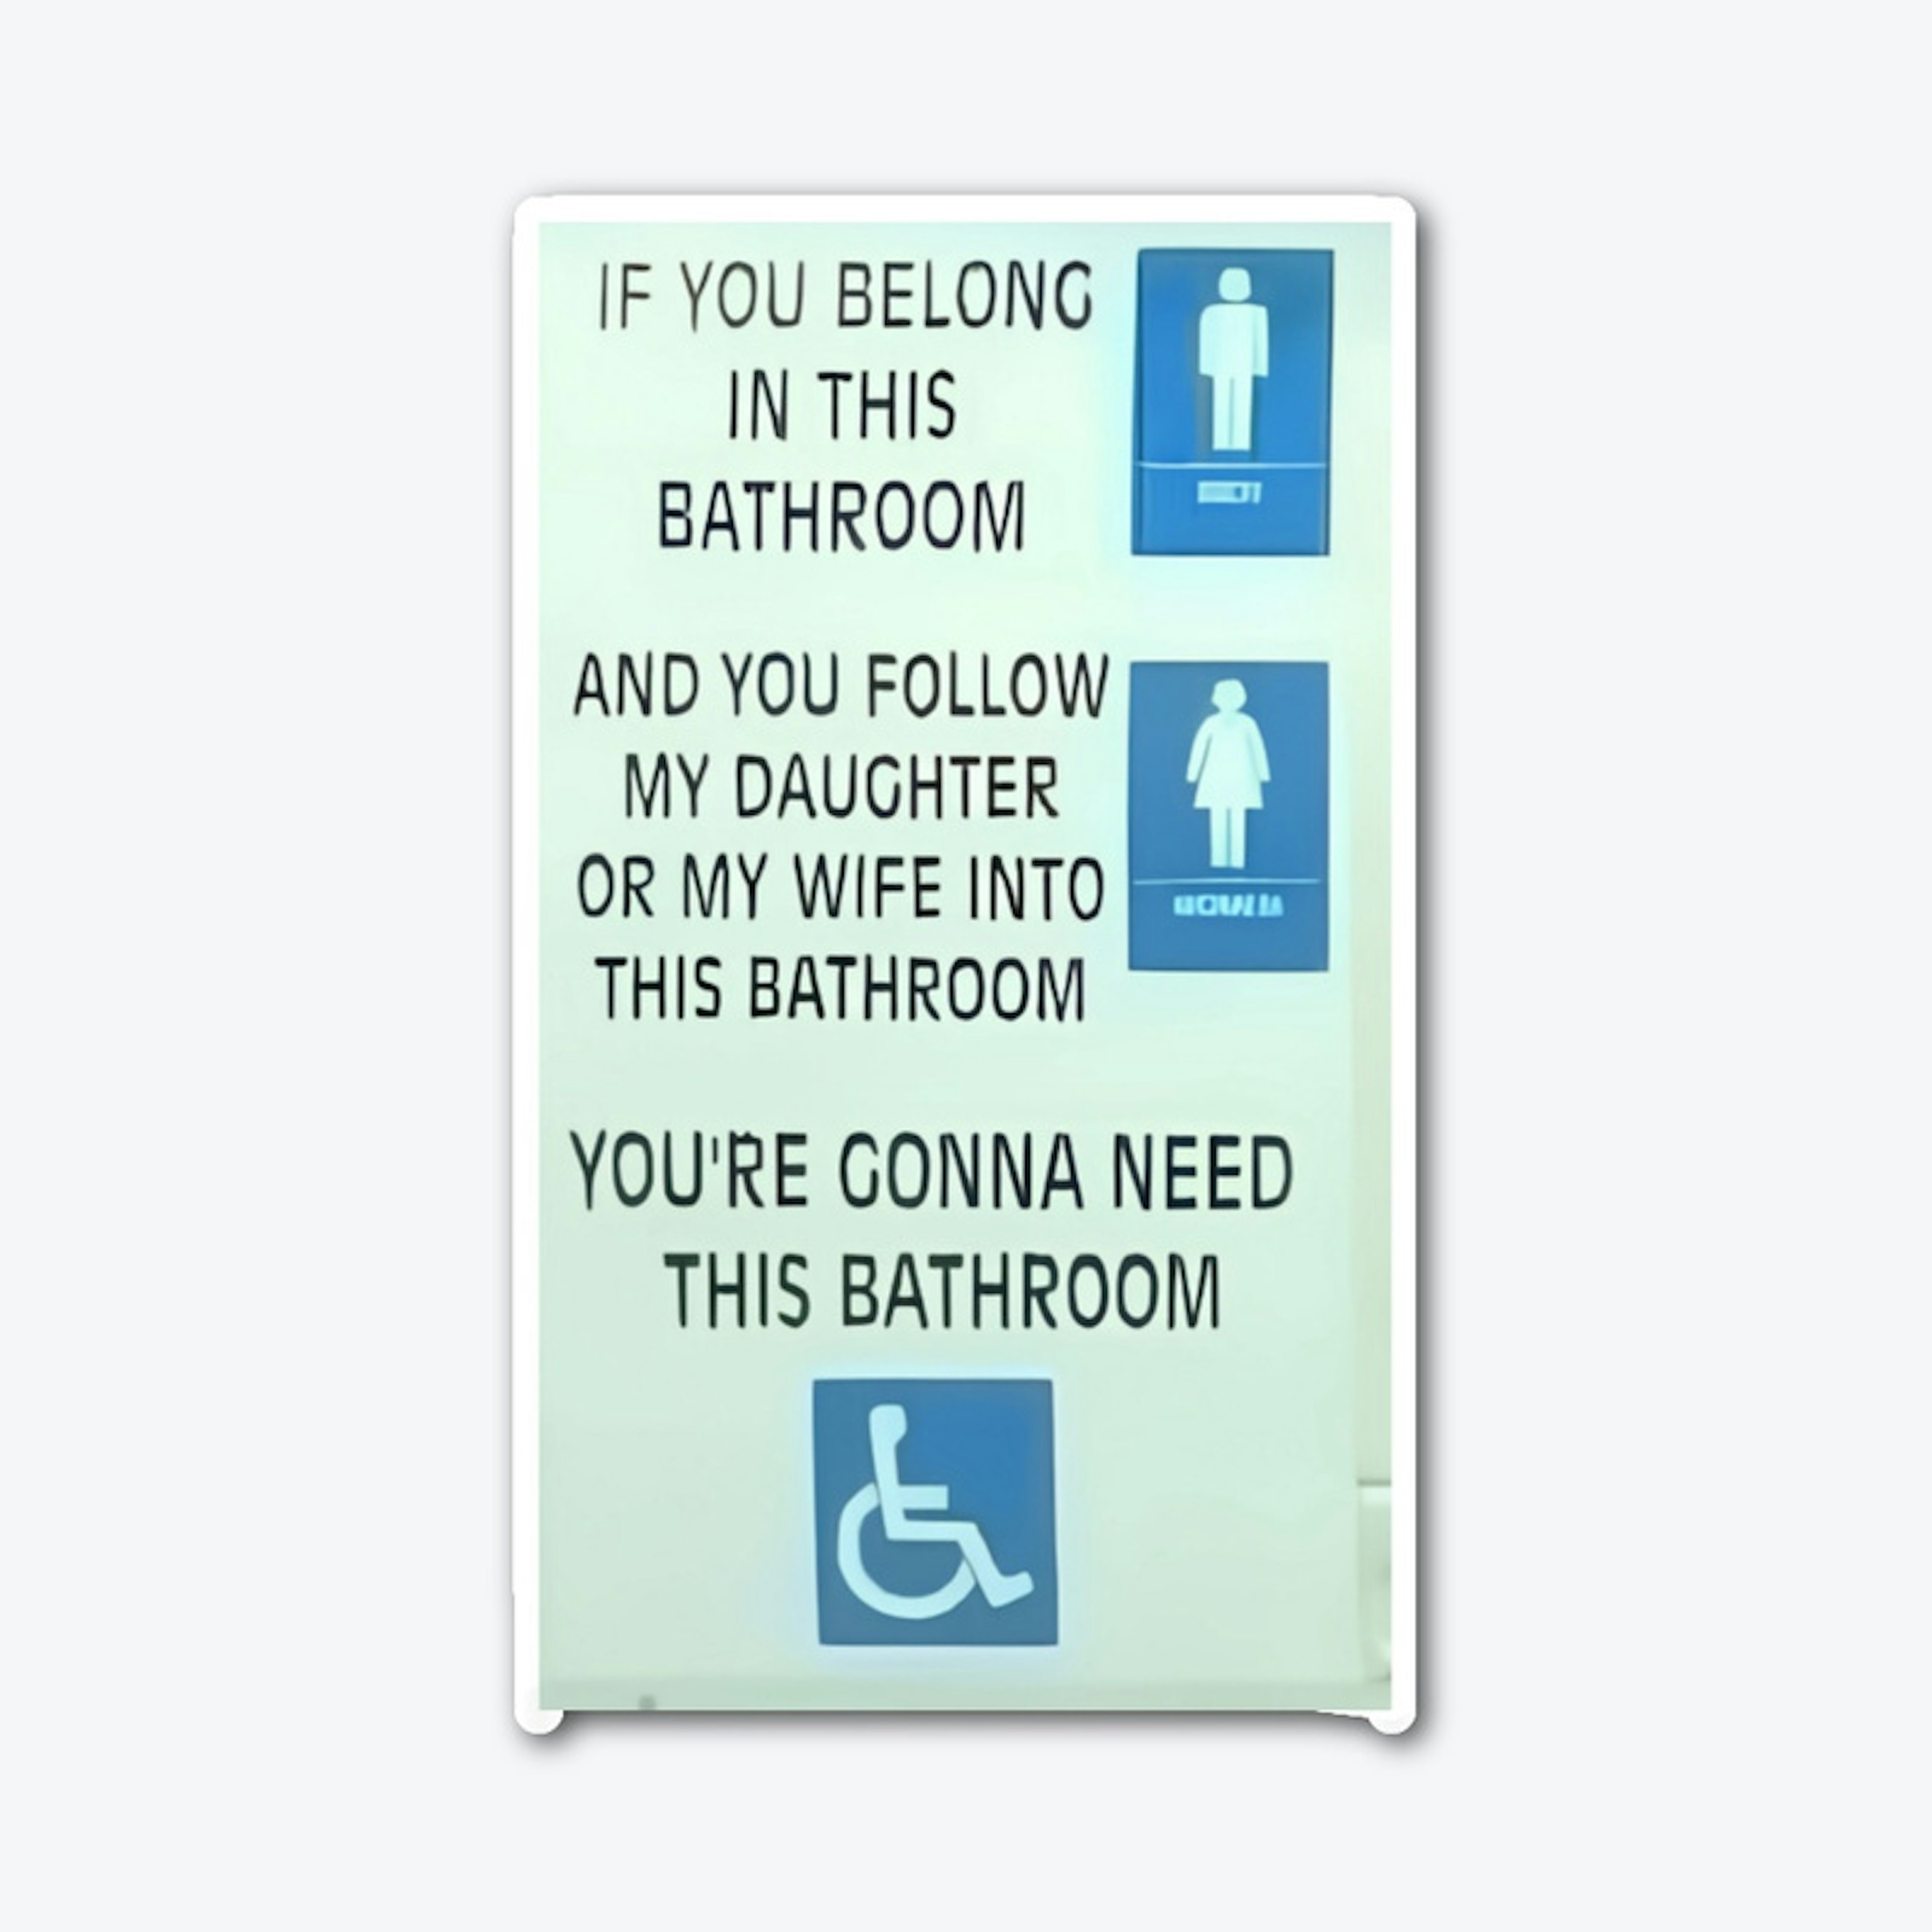 Your GOnna Need This Bathroom Meme